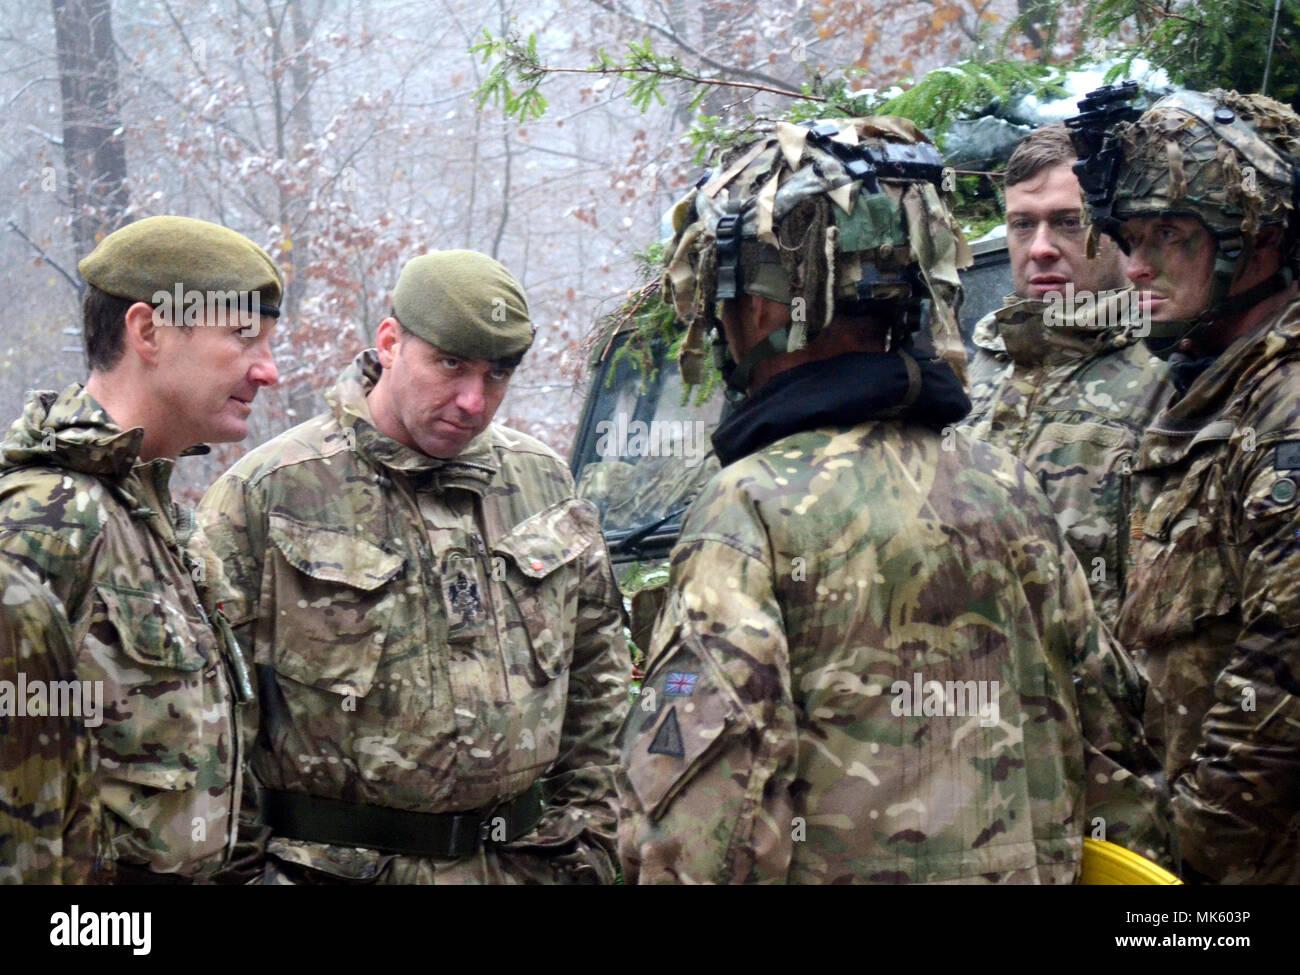 Despite the snow, Brig. Gen. Zac Stenning (Lft), Commander, 1st Mechanized Brigade, British Army, stops by to visit with British soldiers with the 1st Battalion, Royal Regiment of the Fusiliers training at the U.S. Army's Joint Multinational Readiness Center in Hohenfels, Germany, as they participate in Allied Spirit VII, 12 Nov. 2017. Approximately 4,050 service members from 13 nations are participating in exercise Allied Spirit VII at 7th Army Training Command’s Hohenfels Training Area, Germany, Oct. 30 to Nov. 22, 2017. Allied Spirit is a U.S. Army Europe-directed, 7ATC-conducted multinatio Stock Photo